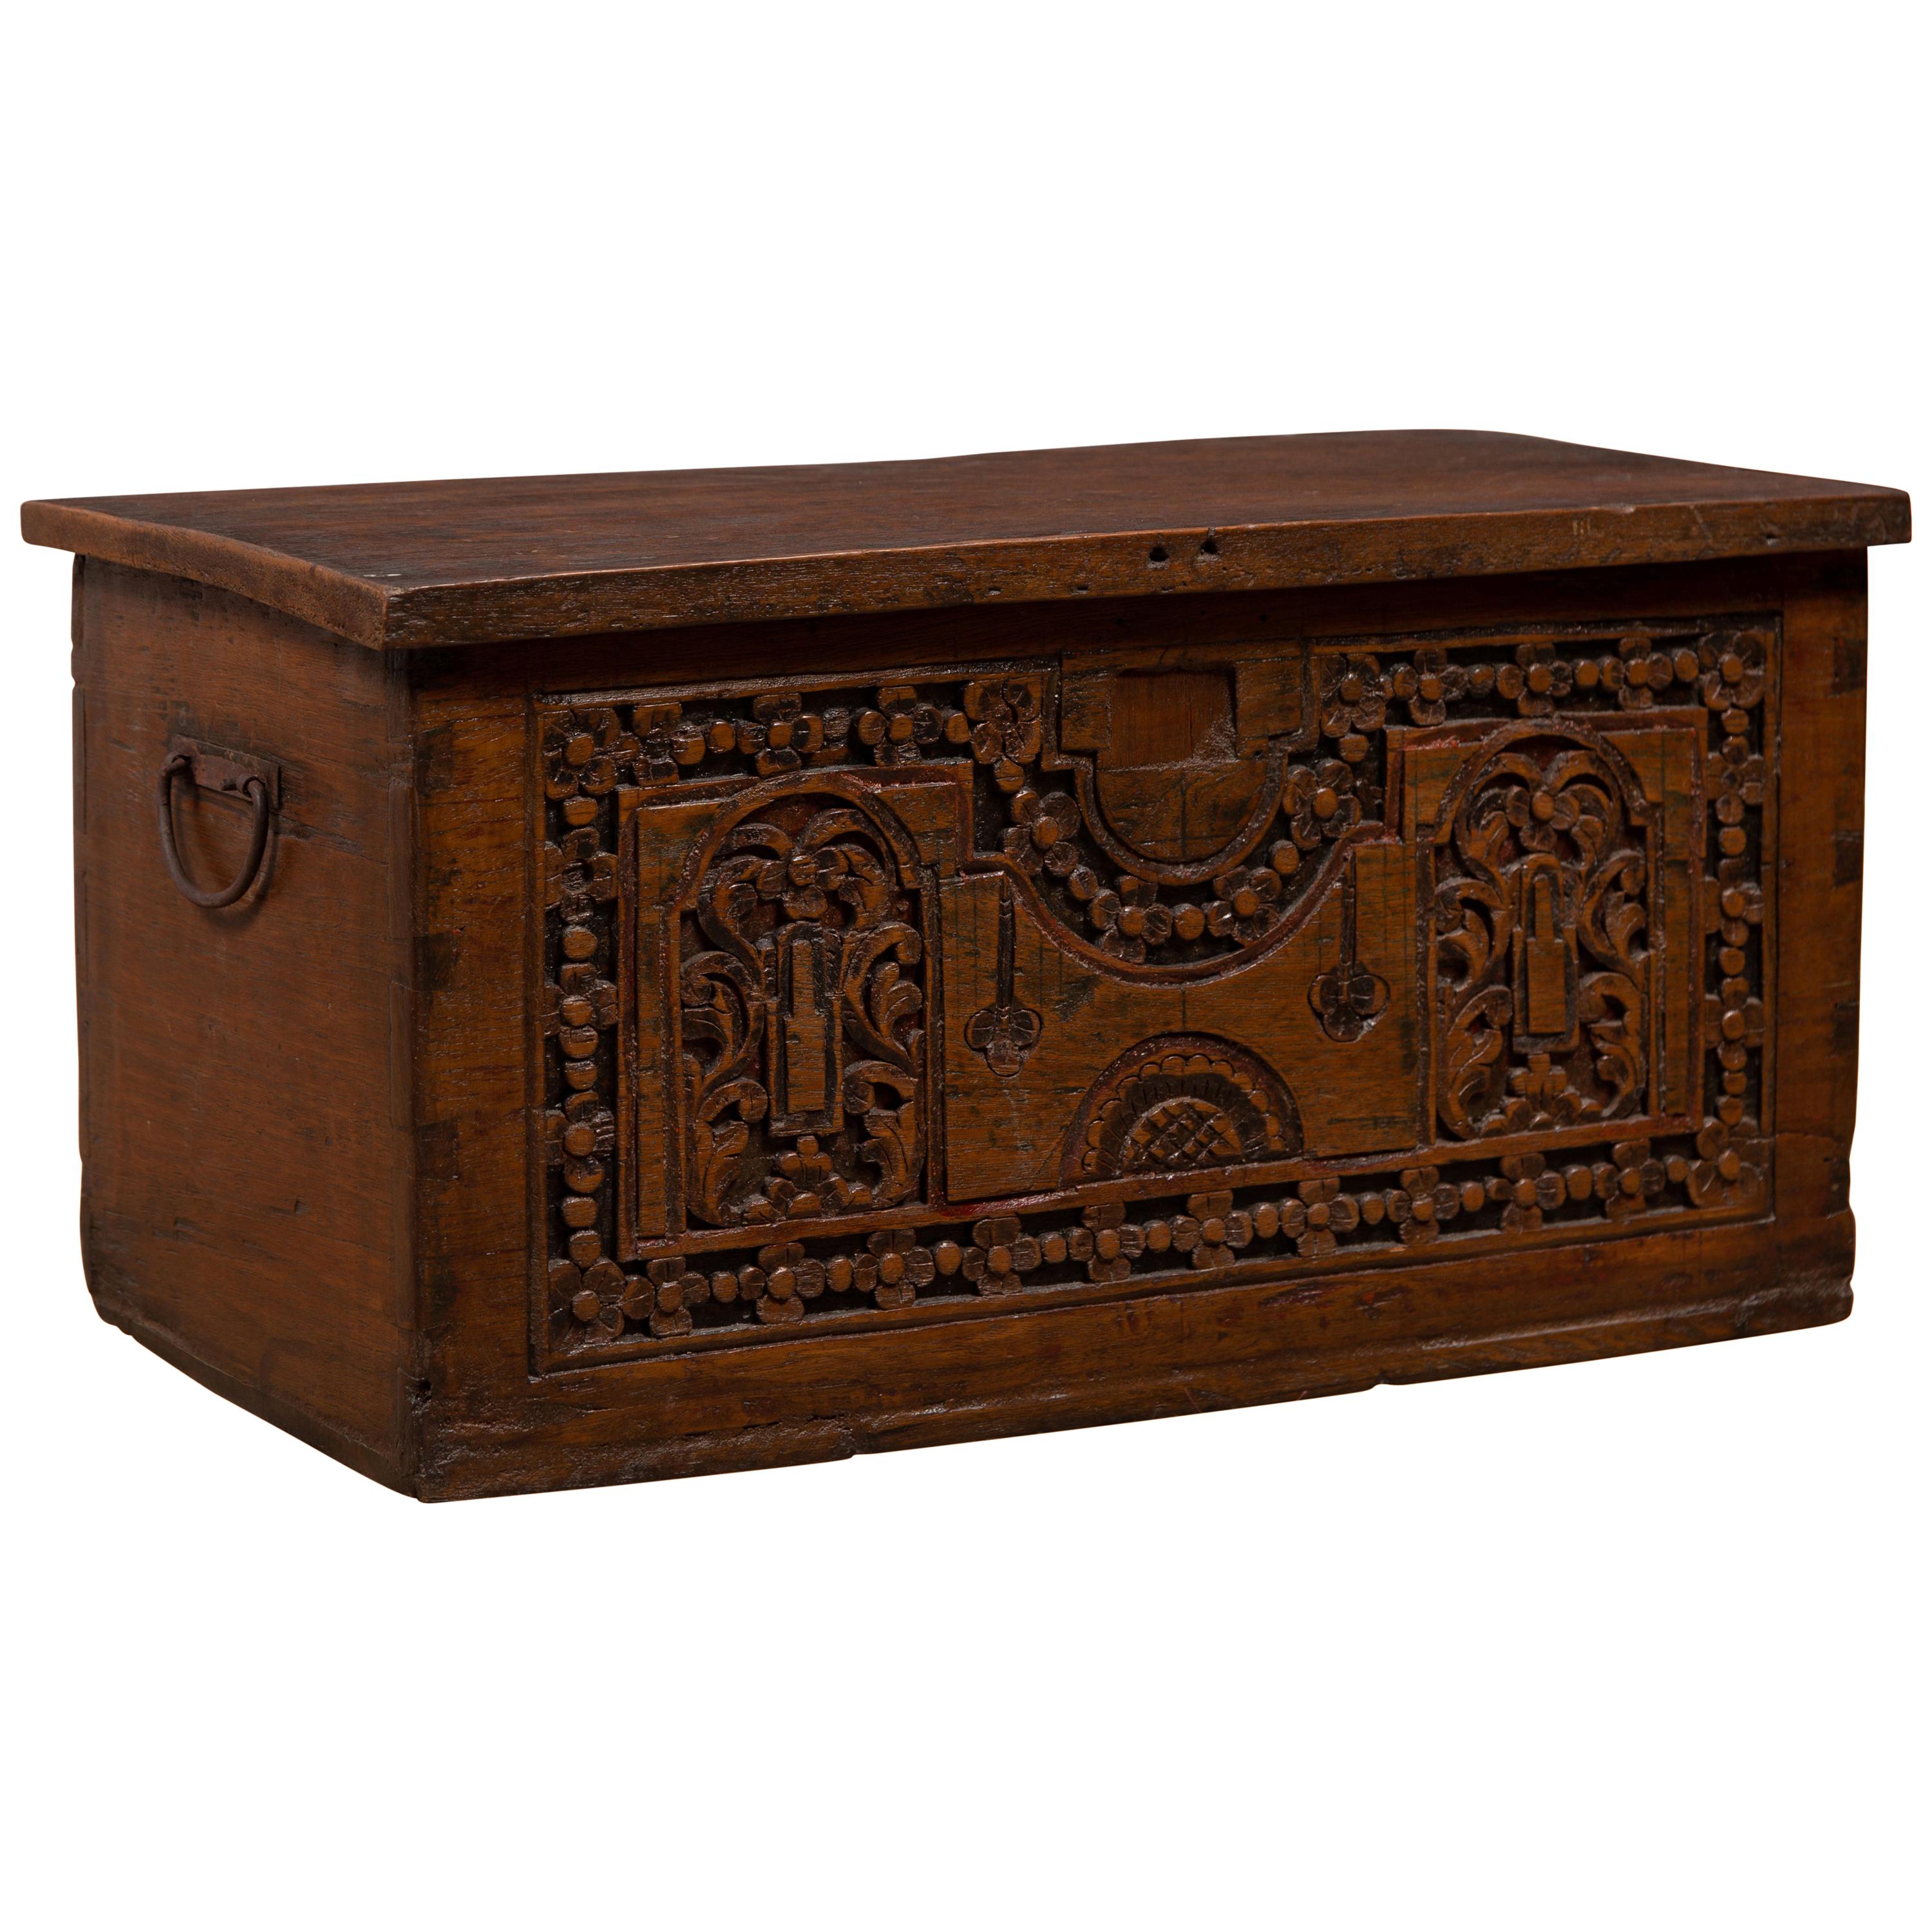 Antique Indonesian Decorative Wooden Box with Carved Flowers and Architecture